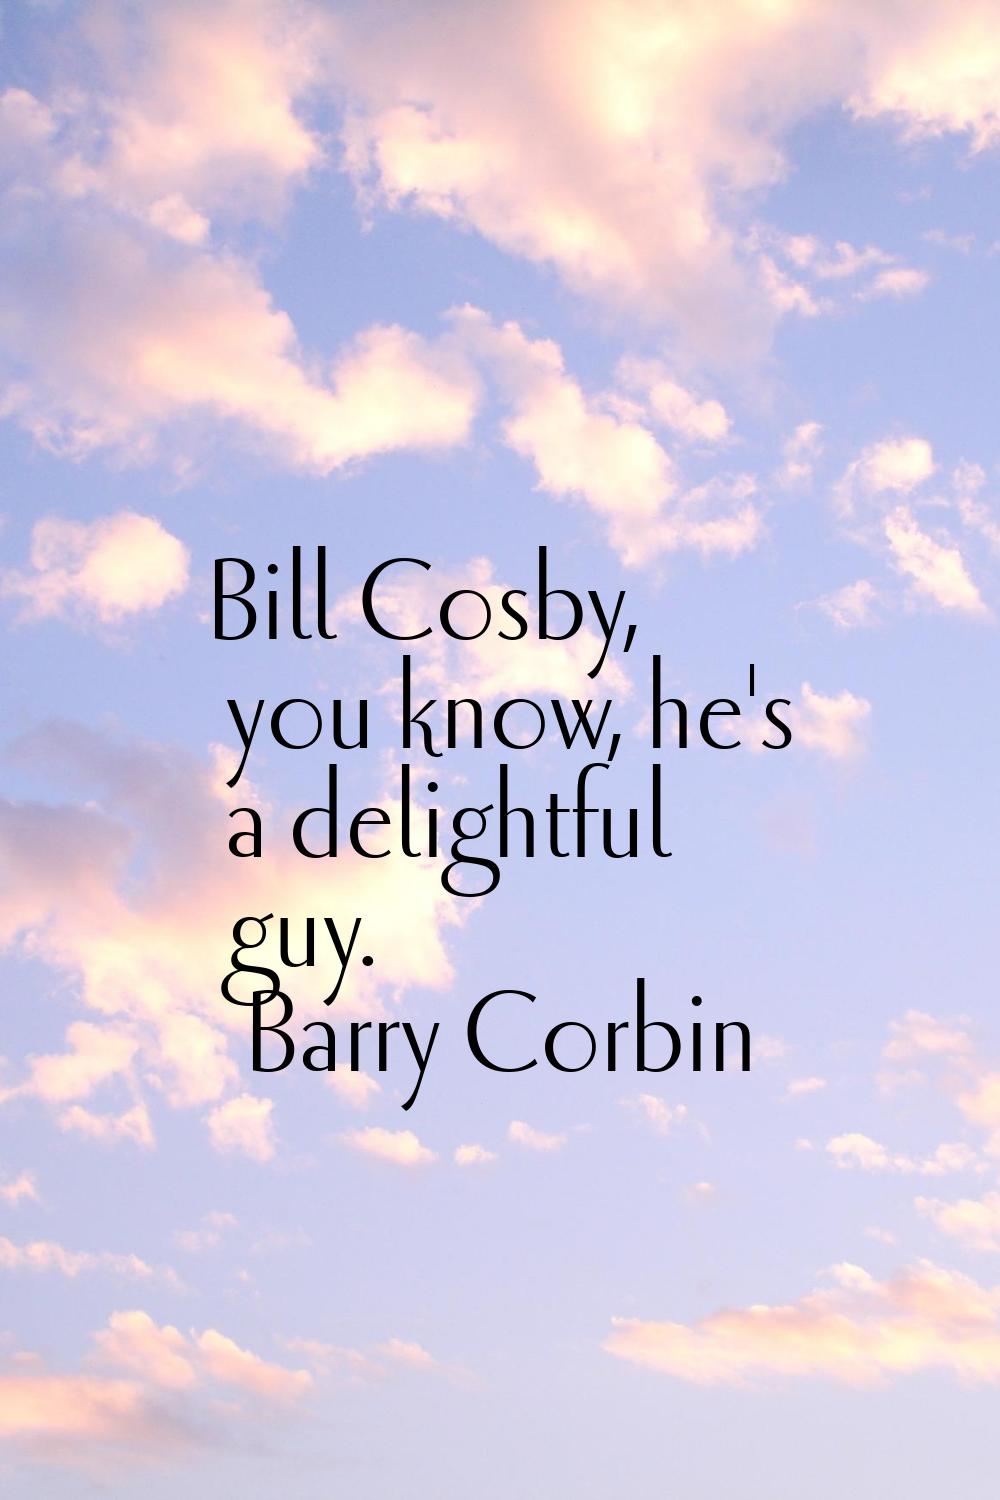 Bill Cosby, you know, he's a delightful guy.